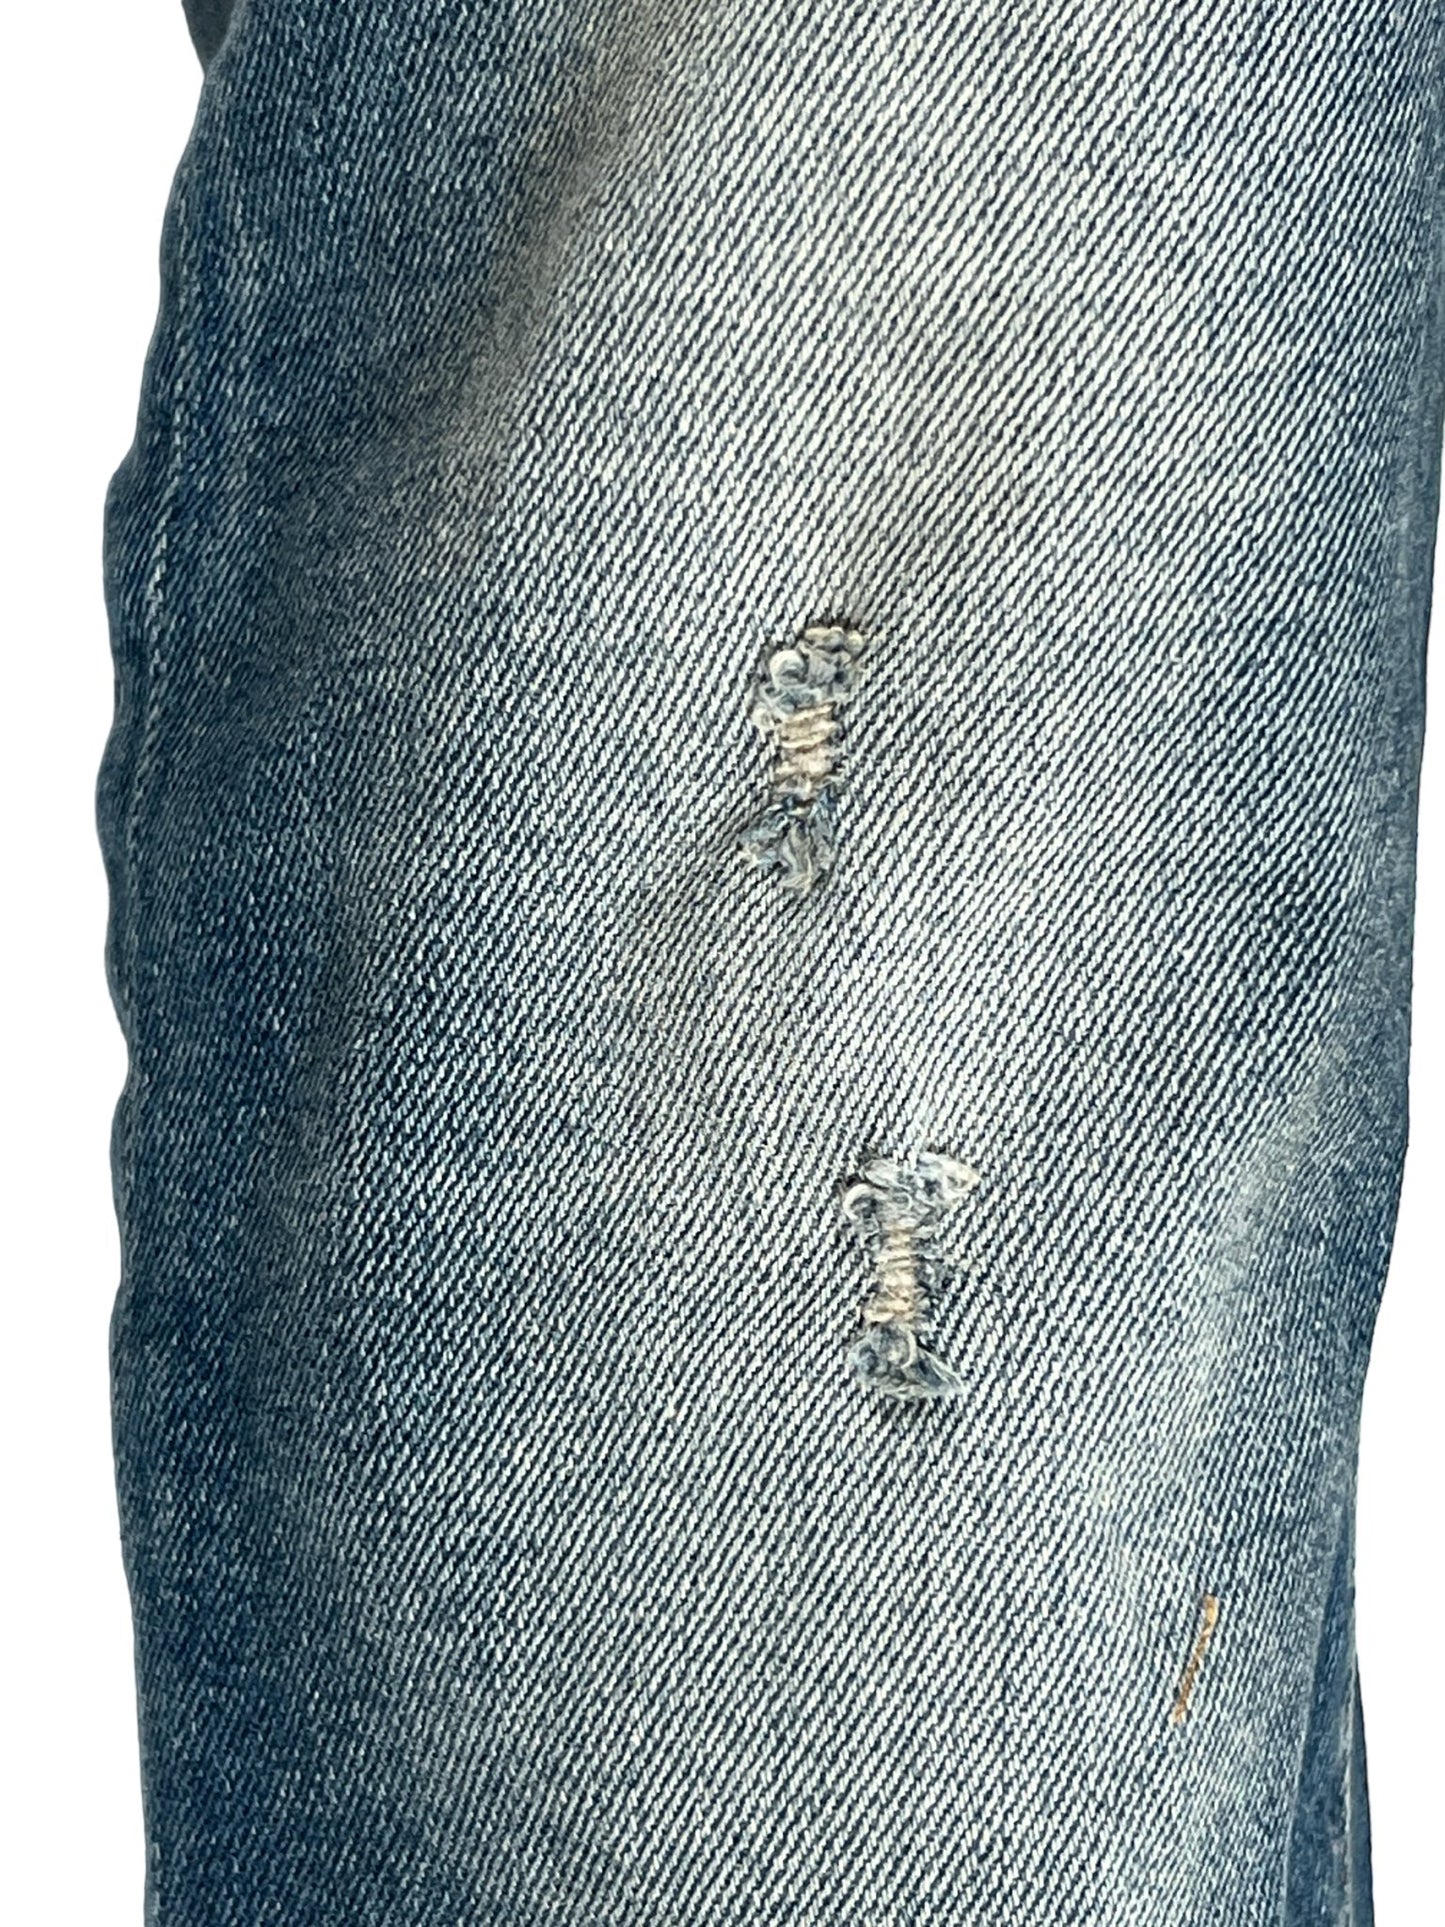 A pair of DIESEL 2019 D-STRUKT 9H55 DENIM with holes in them.